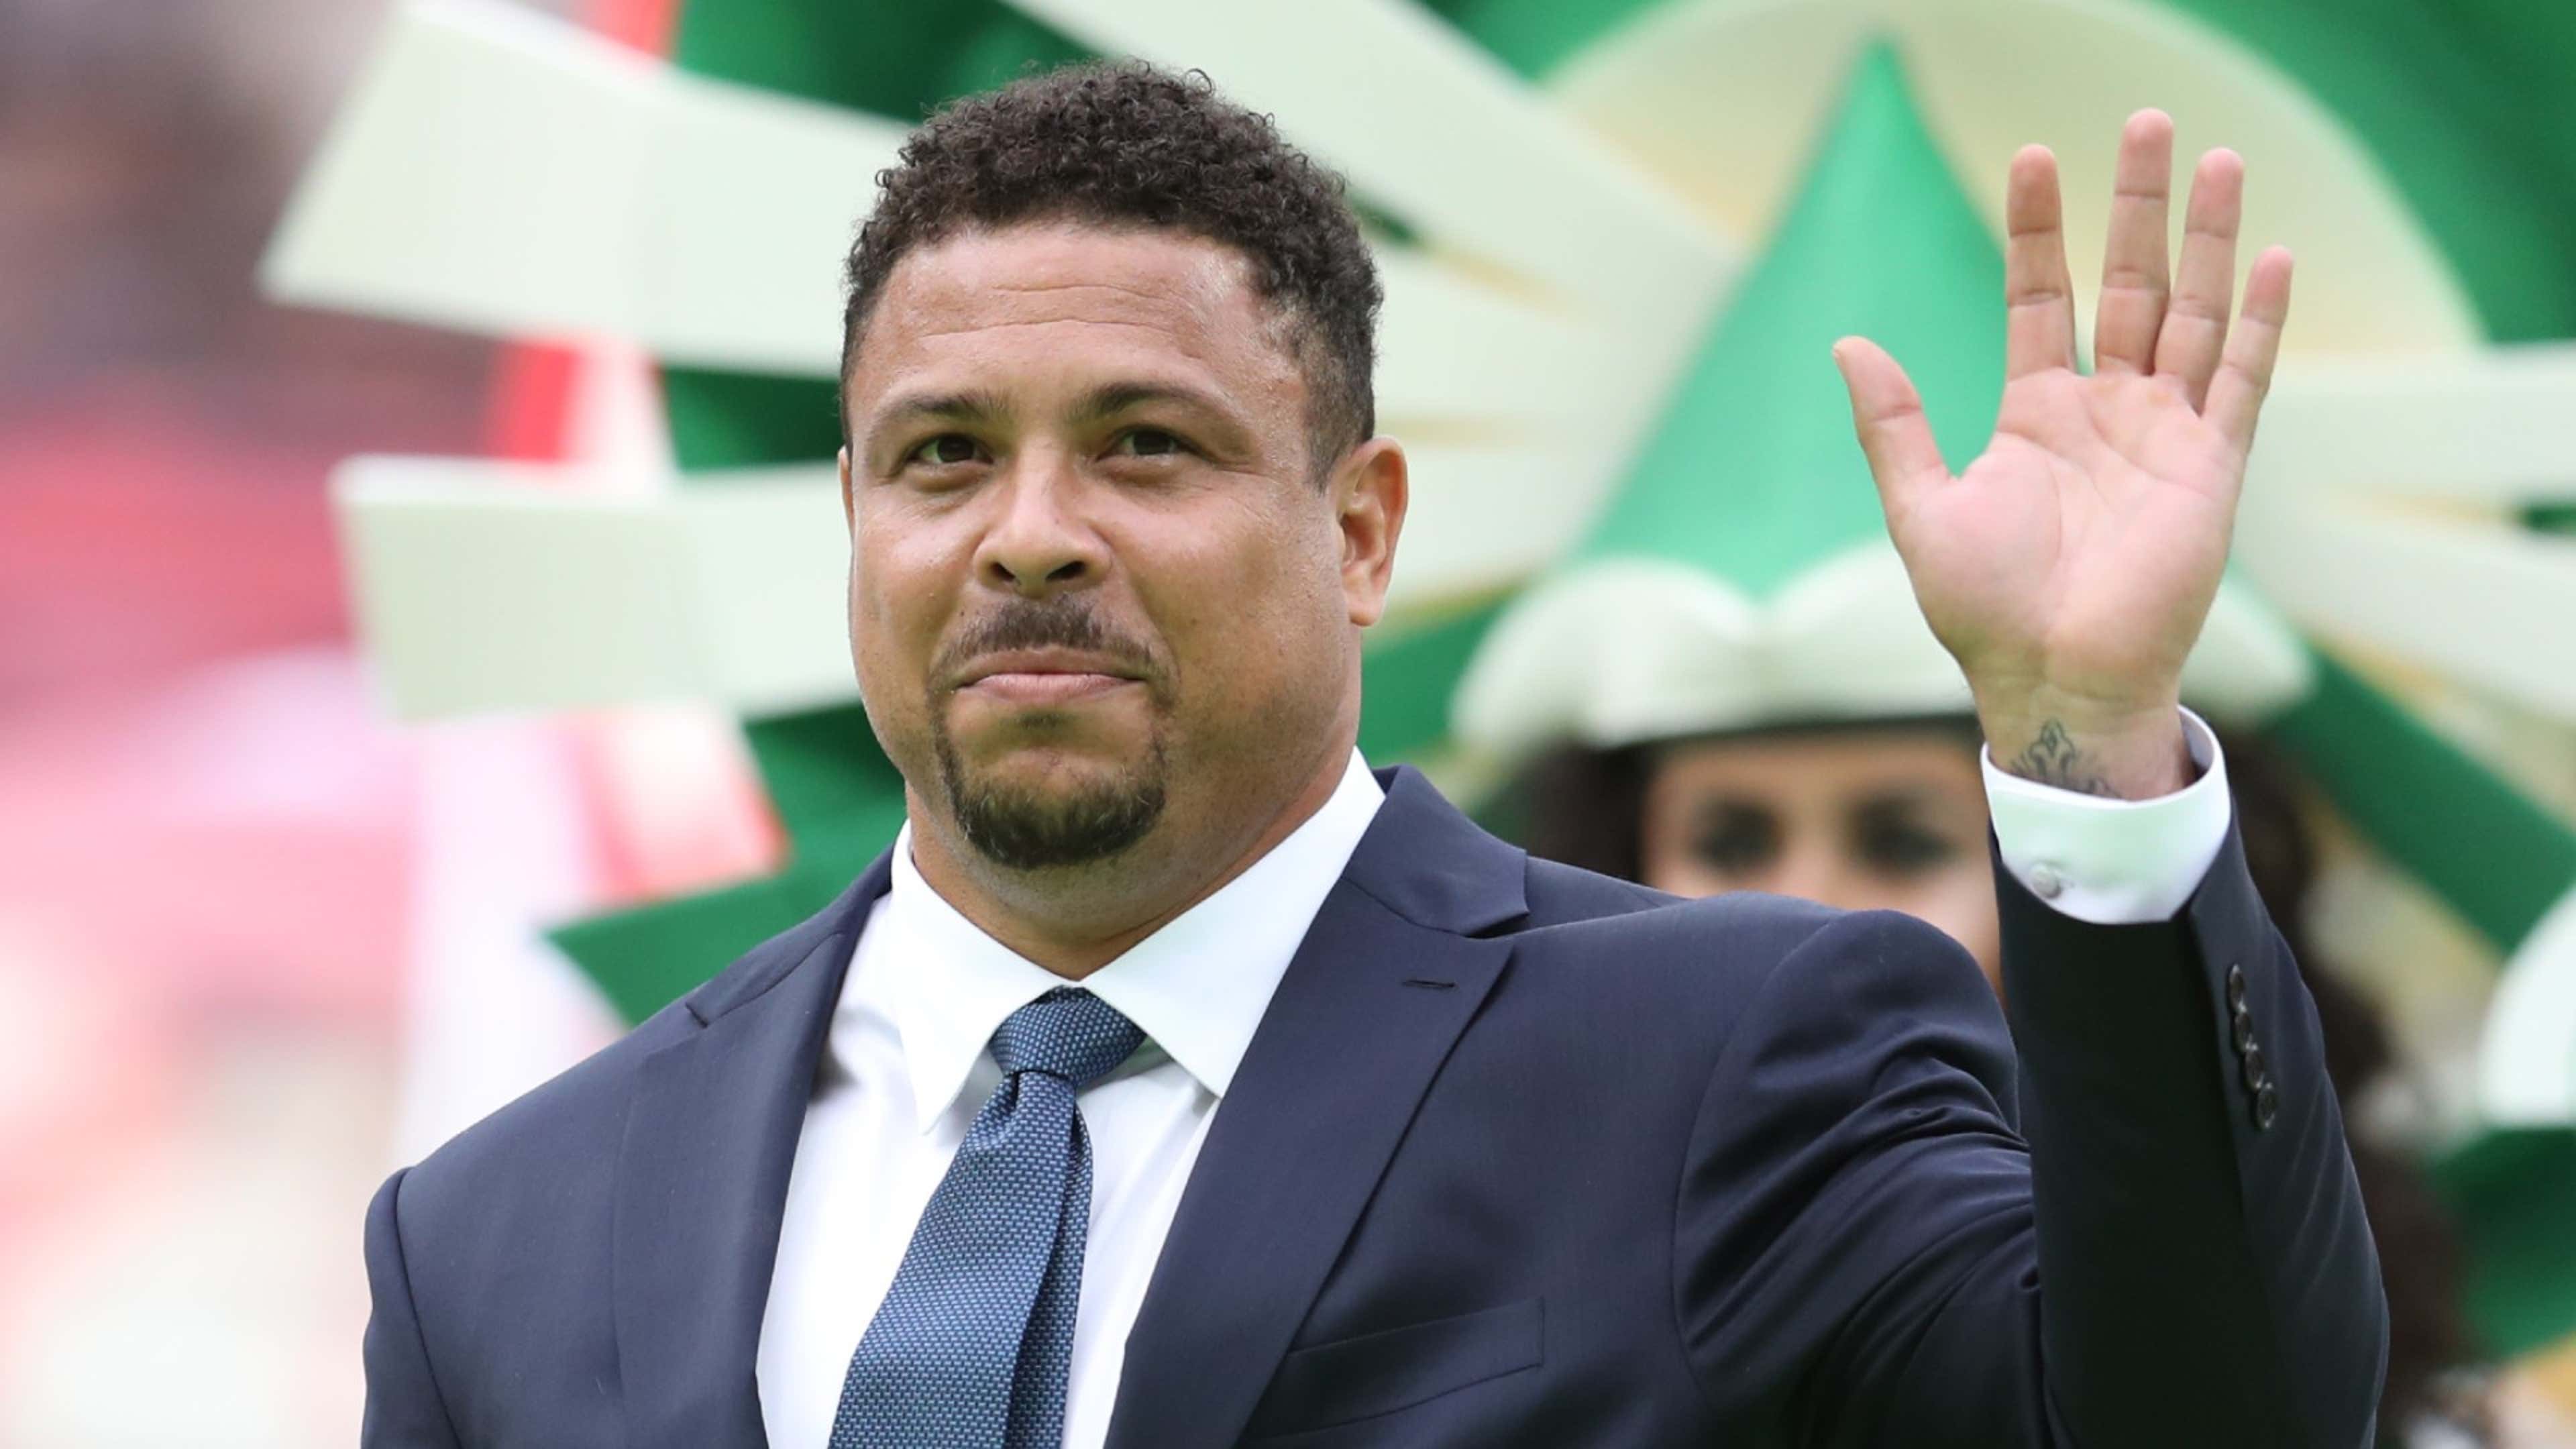 Brazil legend Ronaldo reveals he is in therapy as he opens up about